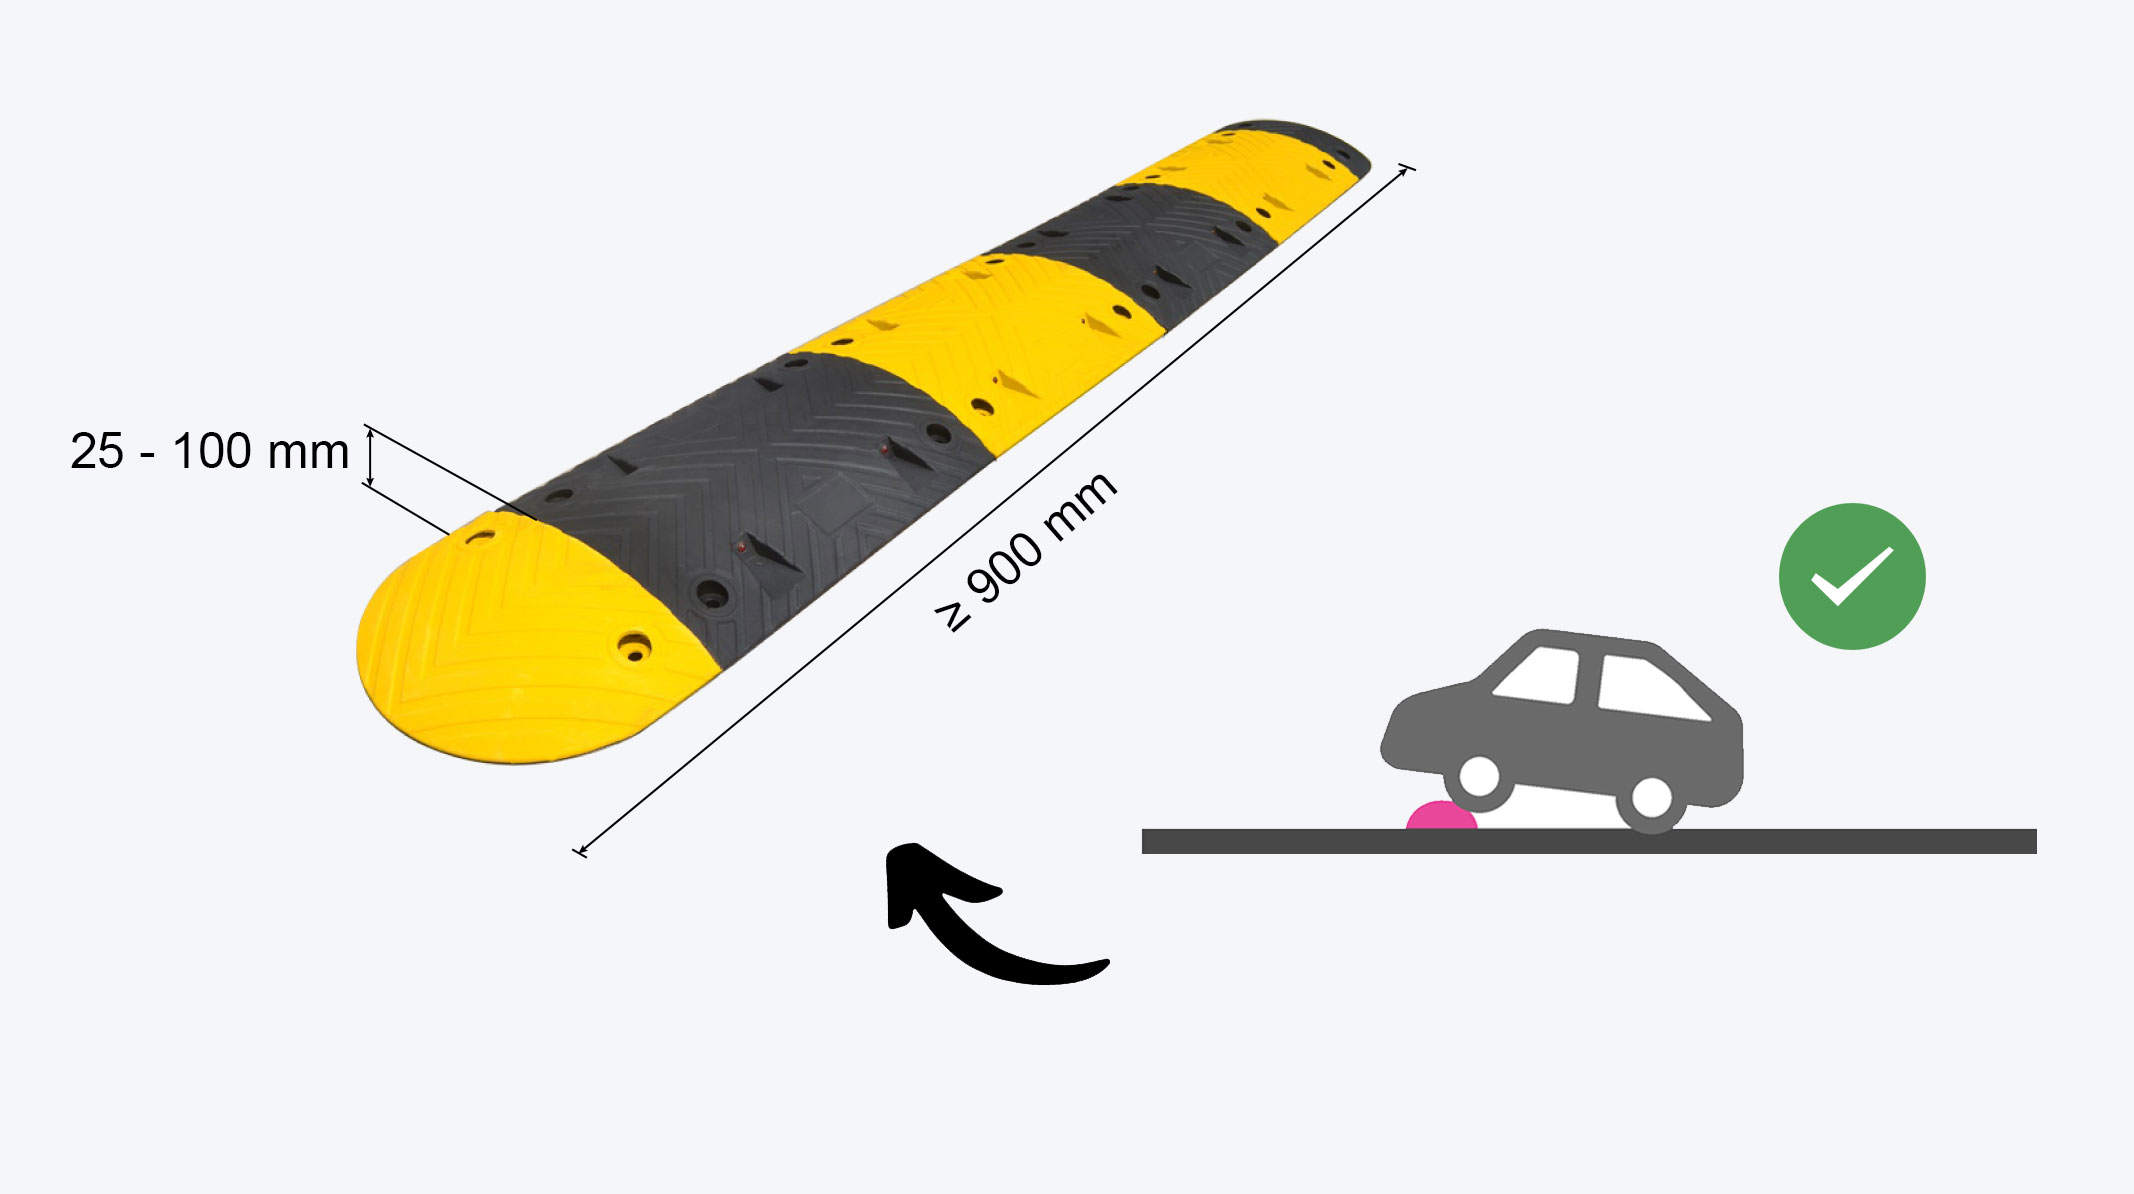 A black and yellow speed bump made of vulcanised rubber.